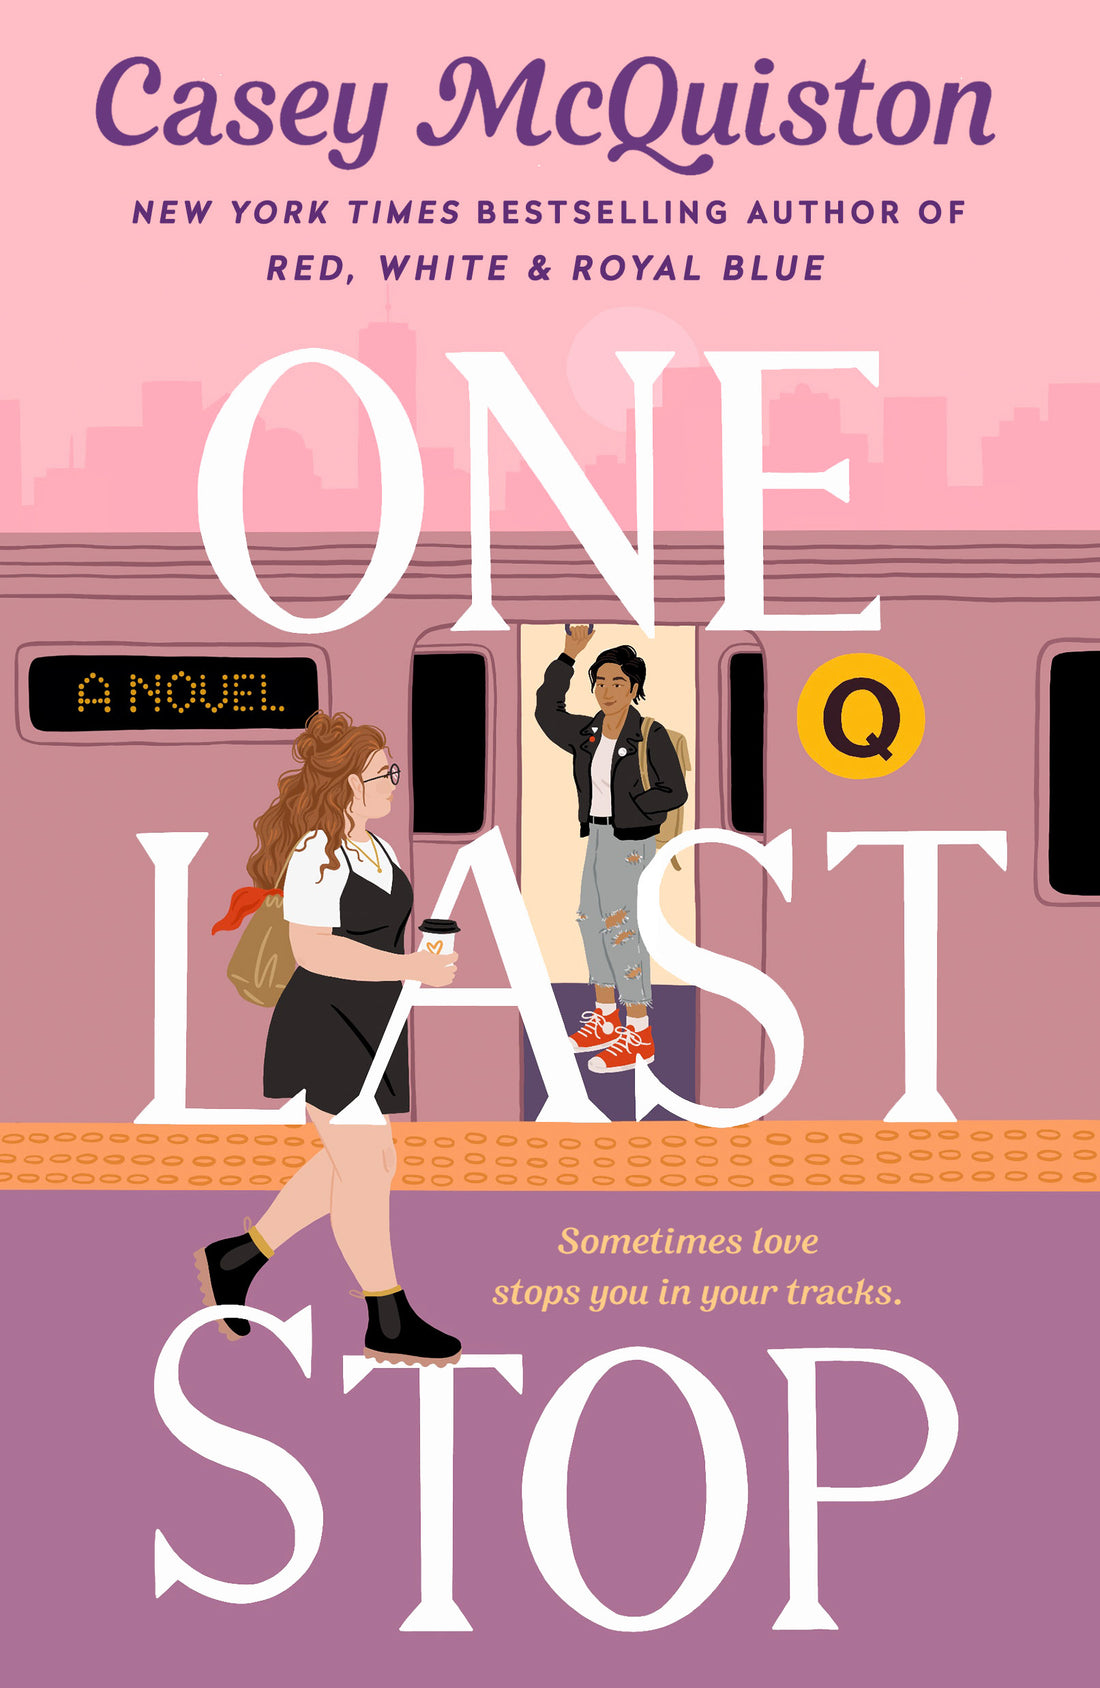 Review of One Last Stop by Casey McQuiston